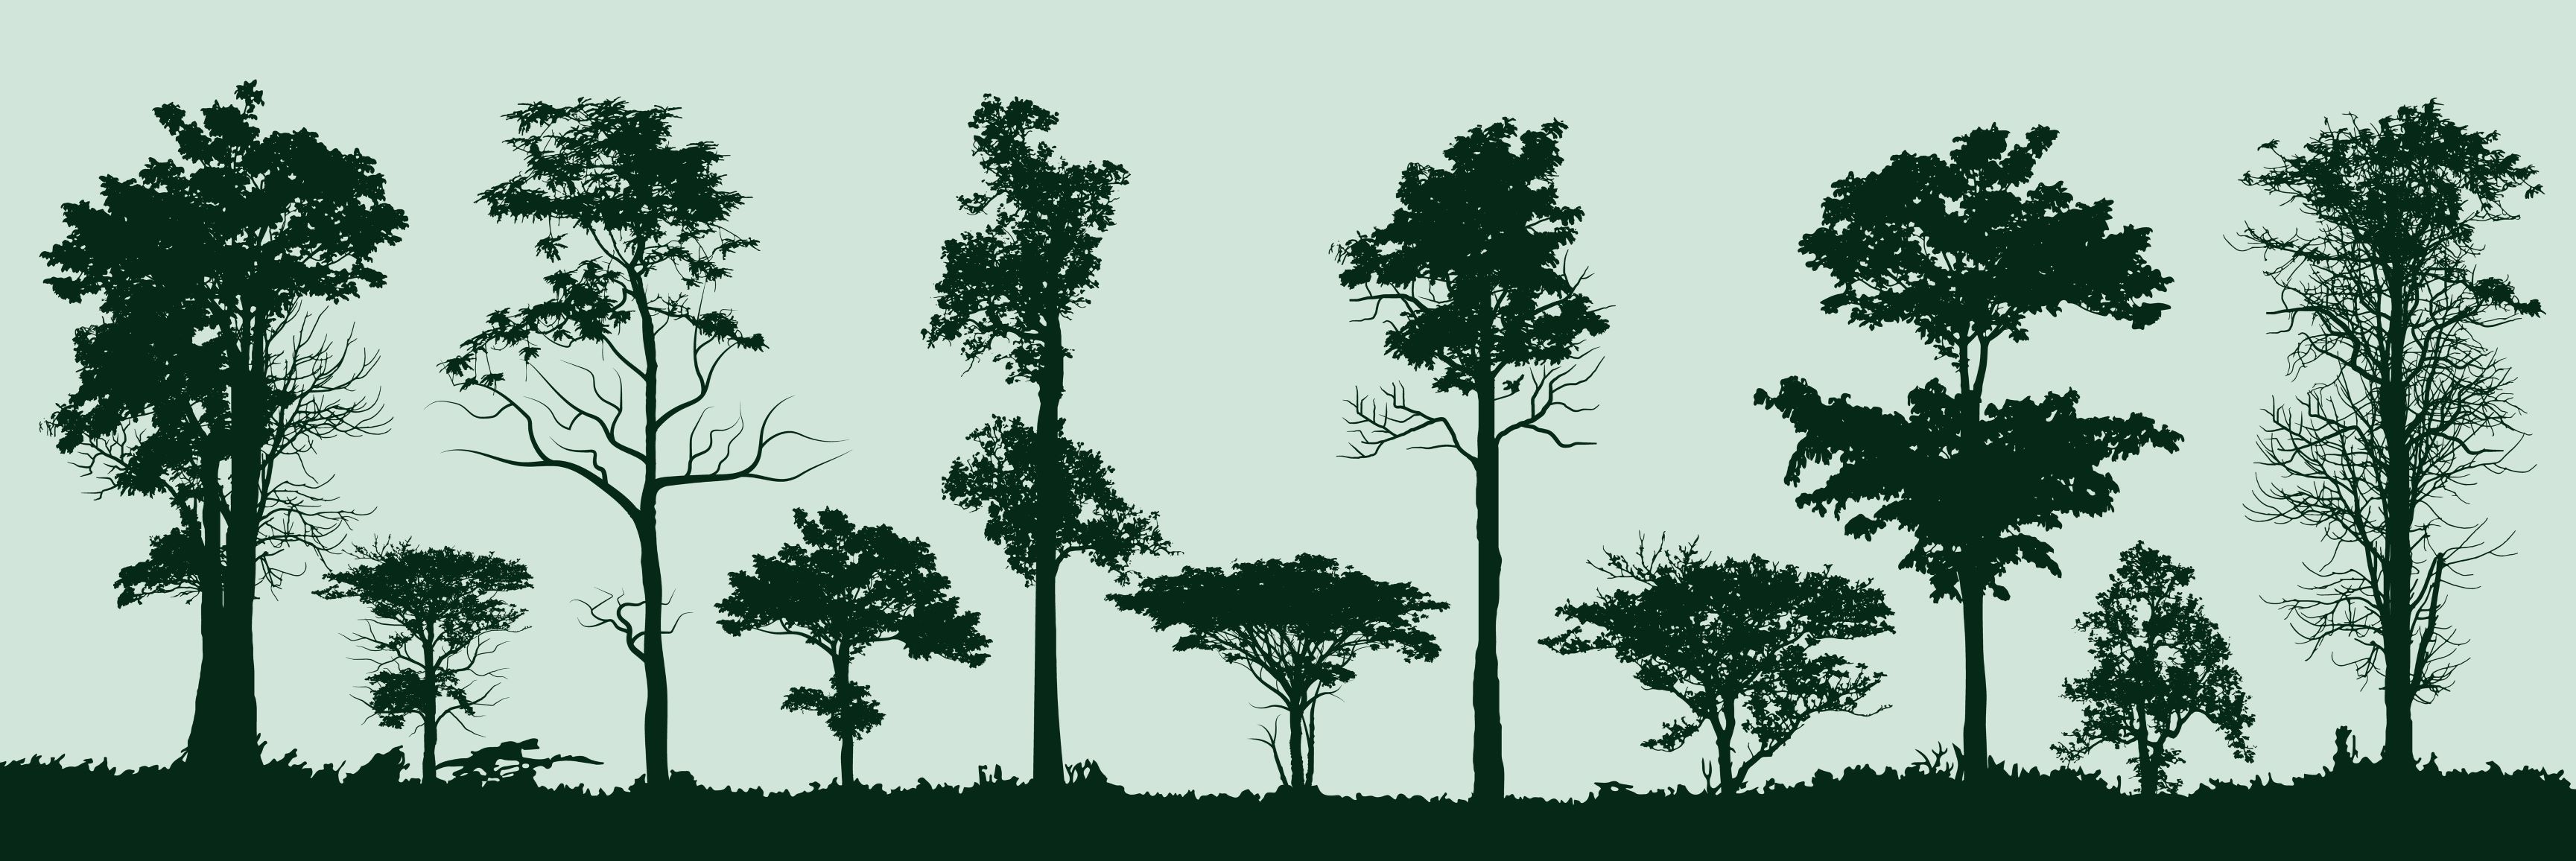 A drawing of a row of trees of varying heights.